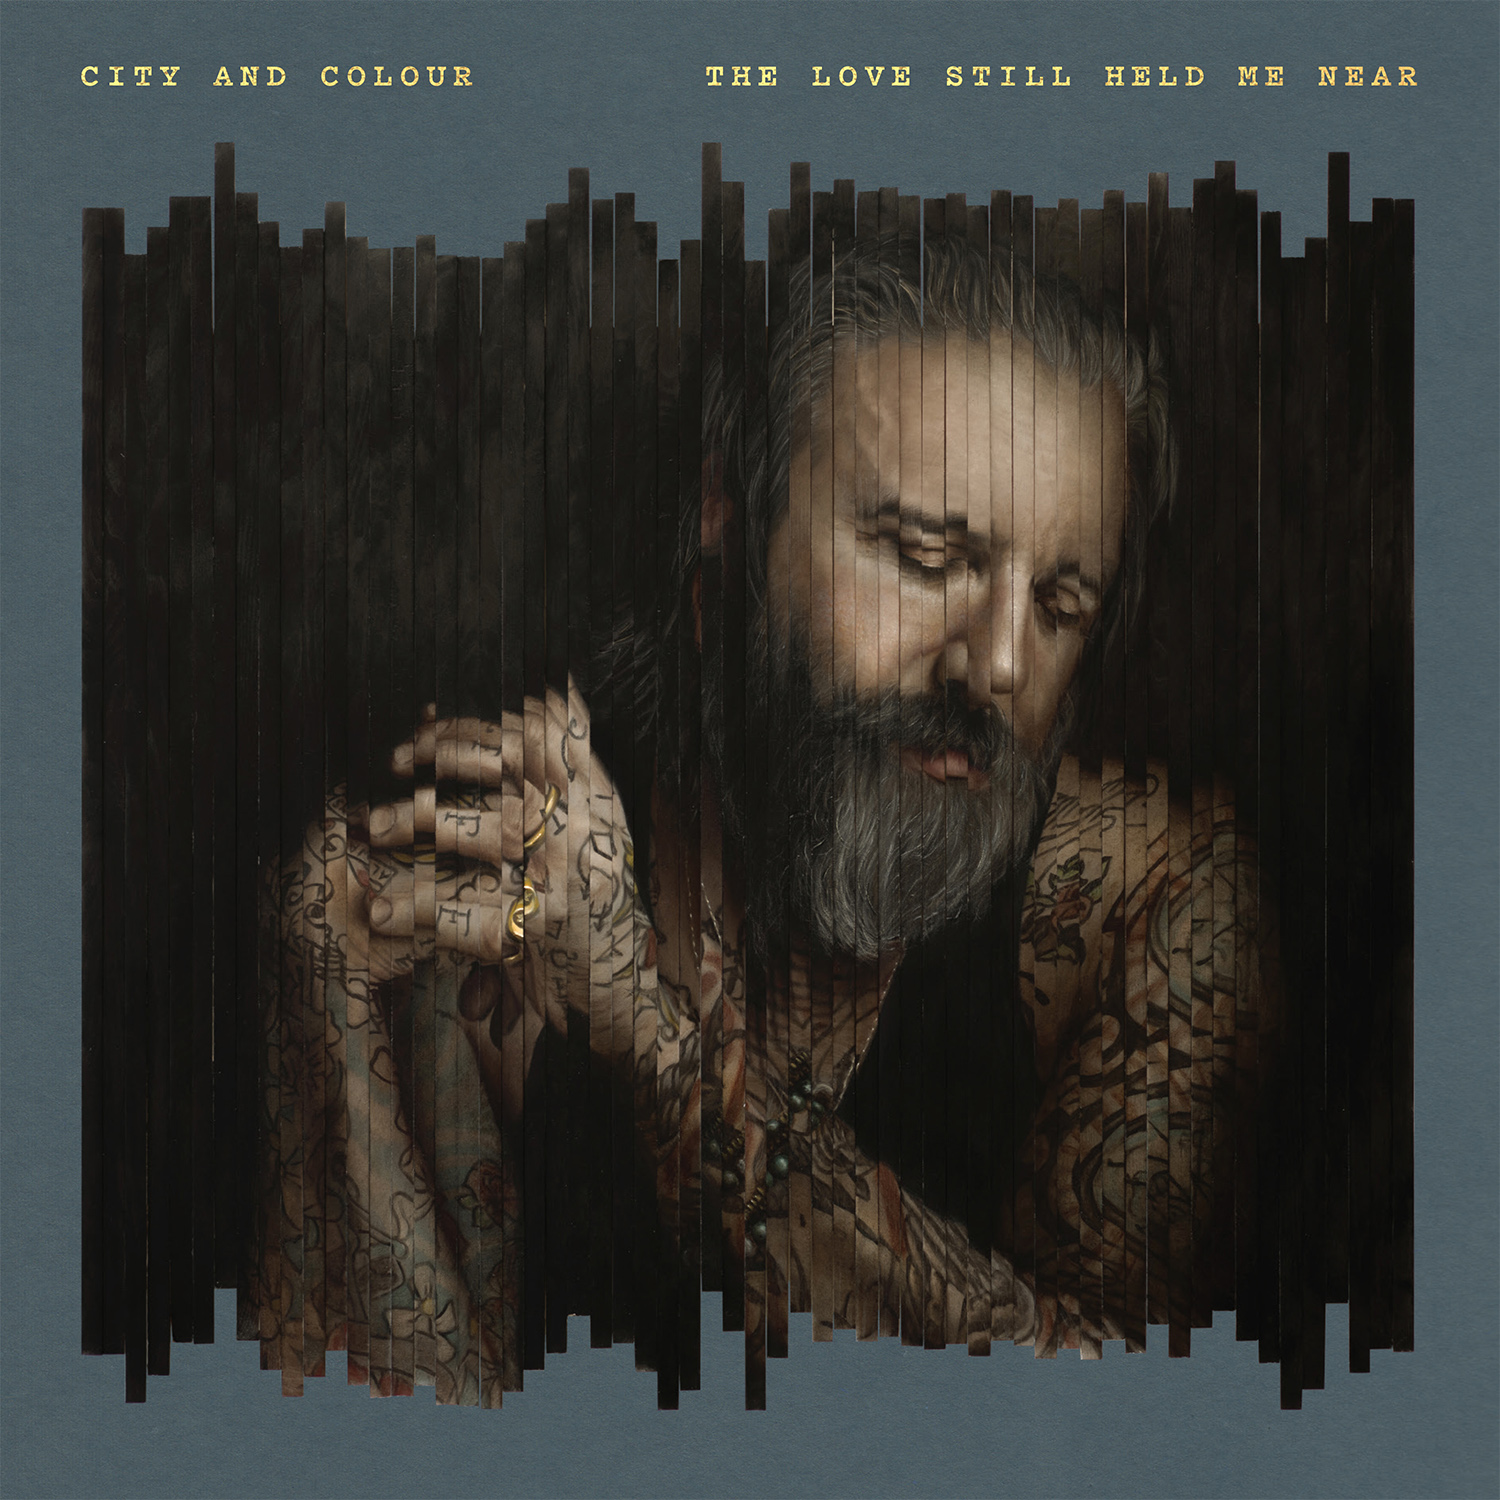 Artwork for “The Love Still Held Me Near” by City And Colour”